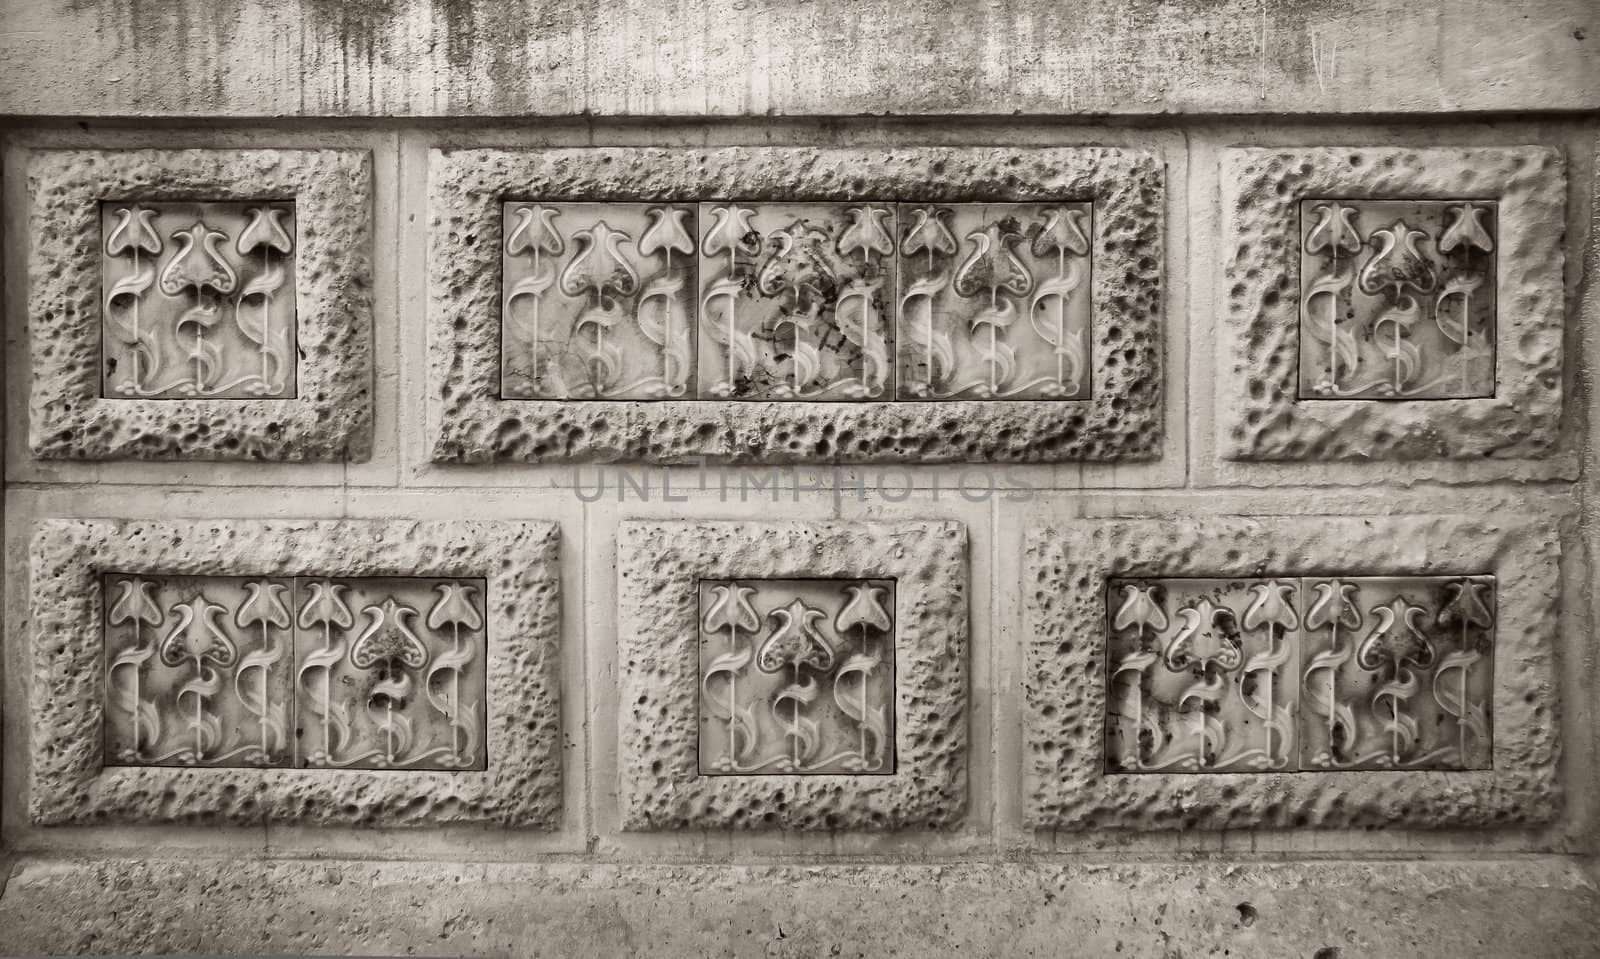 Modernist flowers carving in  stone wall  by doble.d